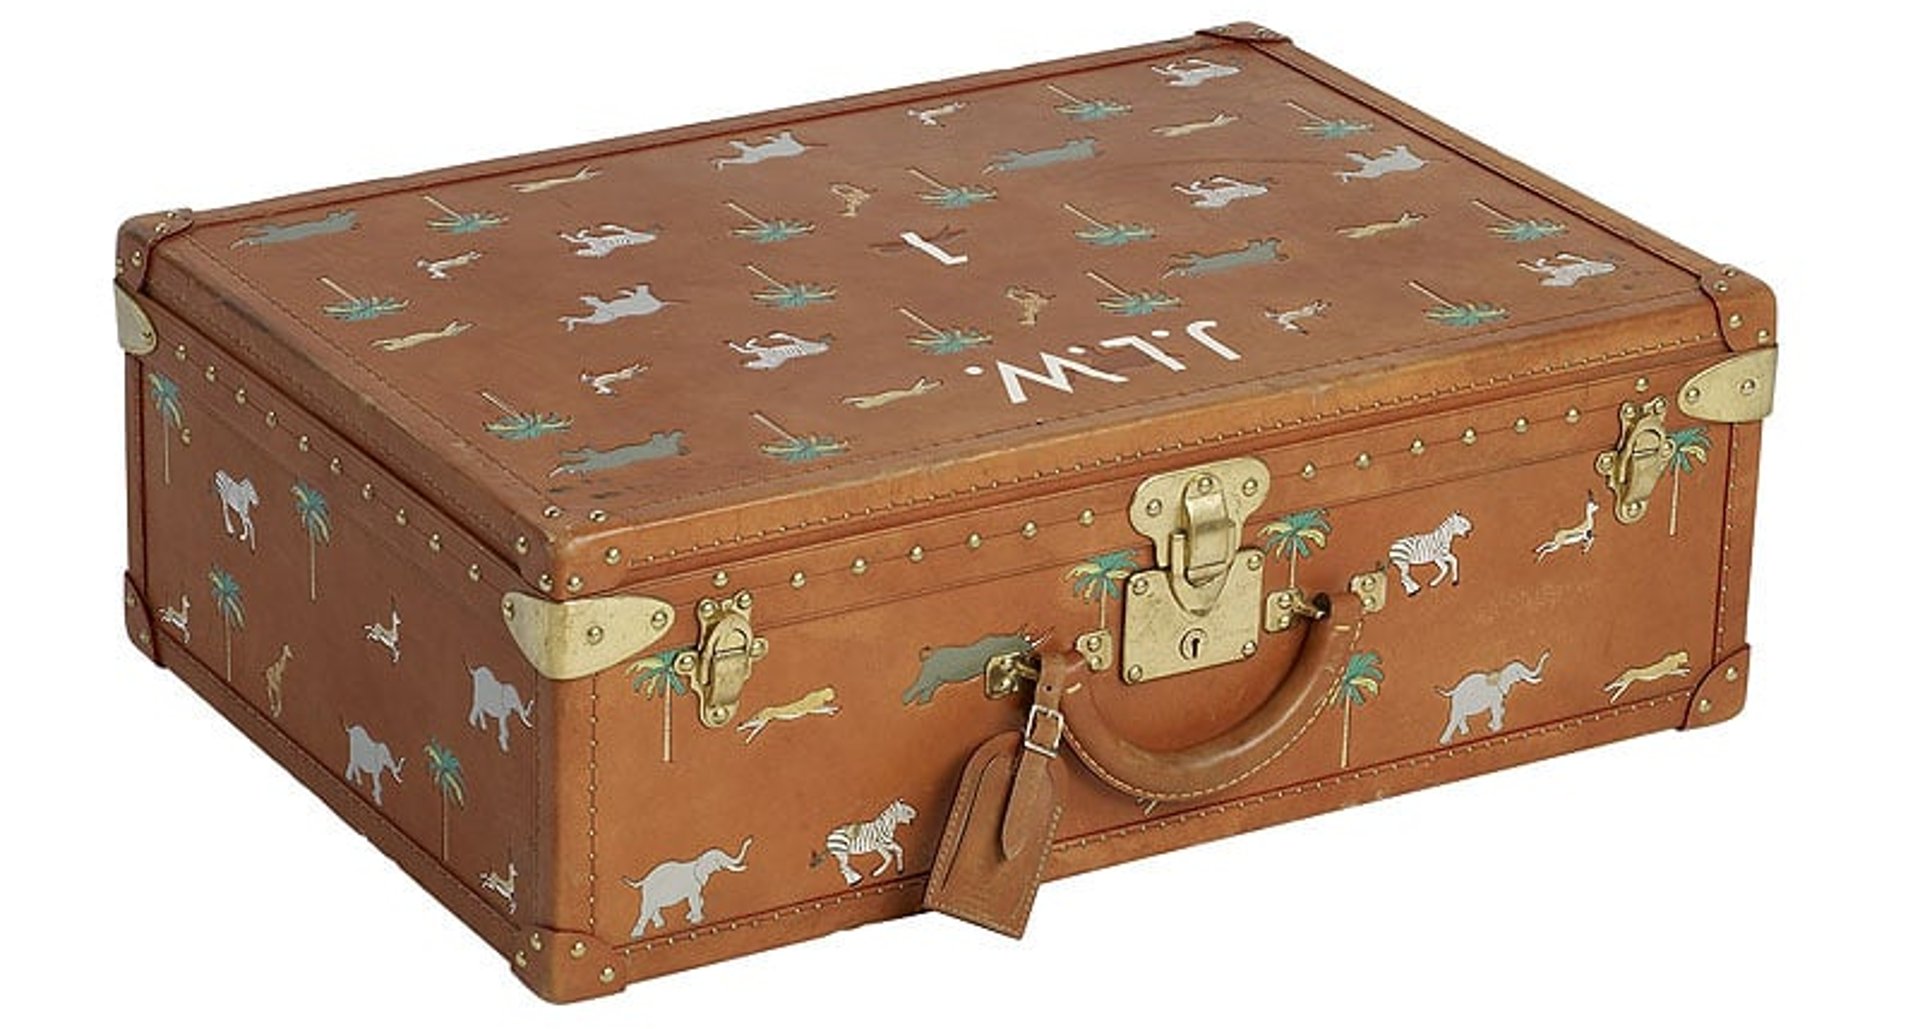 The Travel Bag inspired by Wes Anderson's The Darjeeling Limited movie.  Made of genuine leather, it can be personalized with your initials.